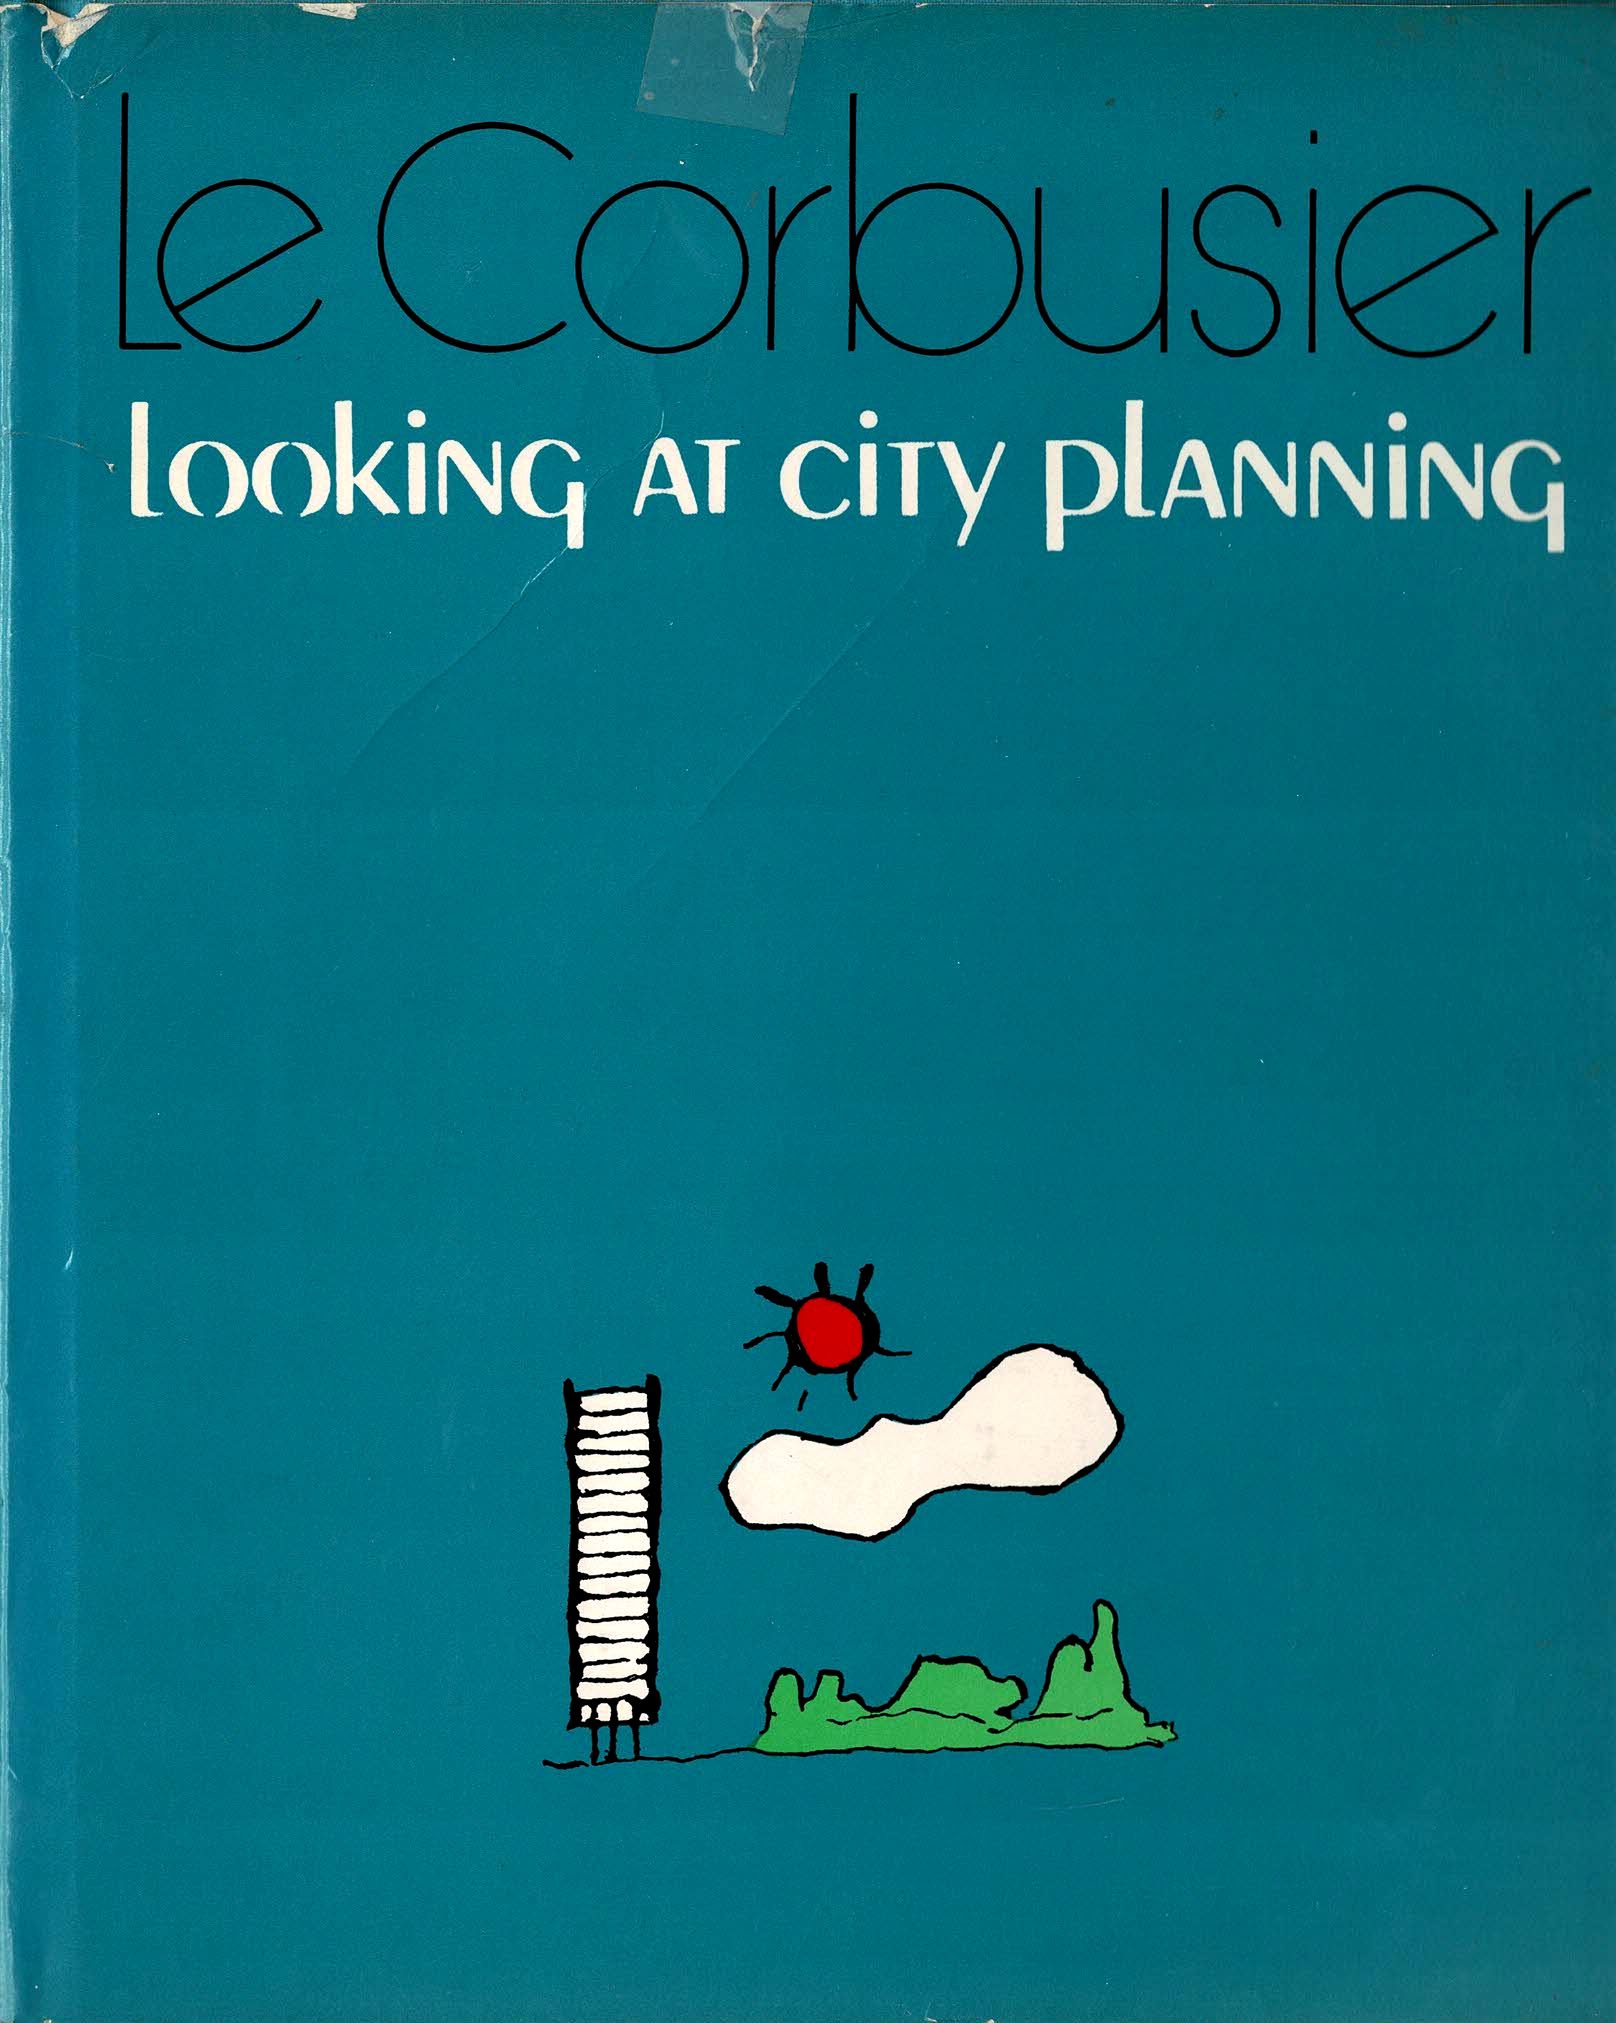 Le Corbusier. - Looking at City Planning.